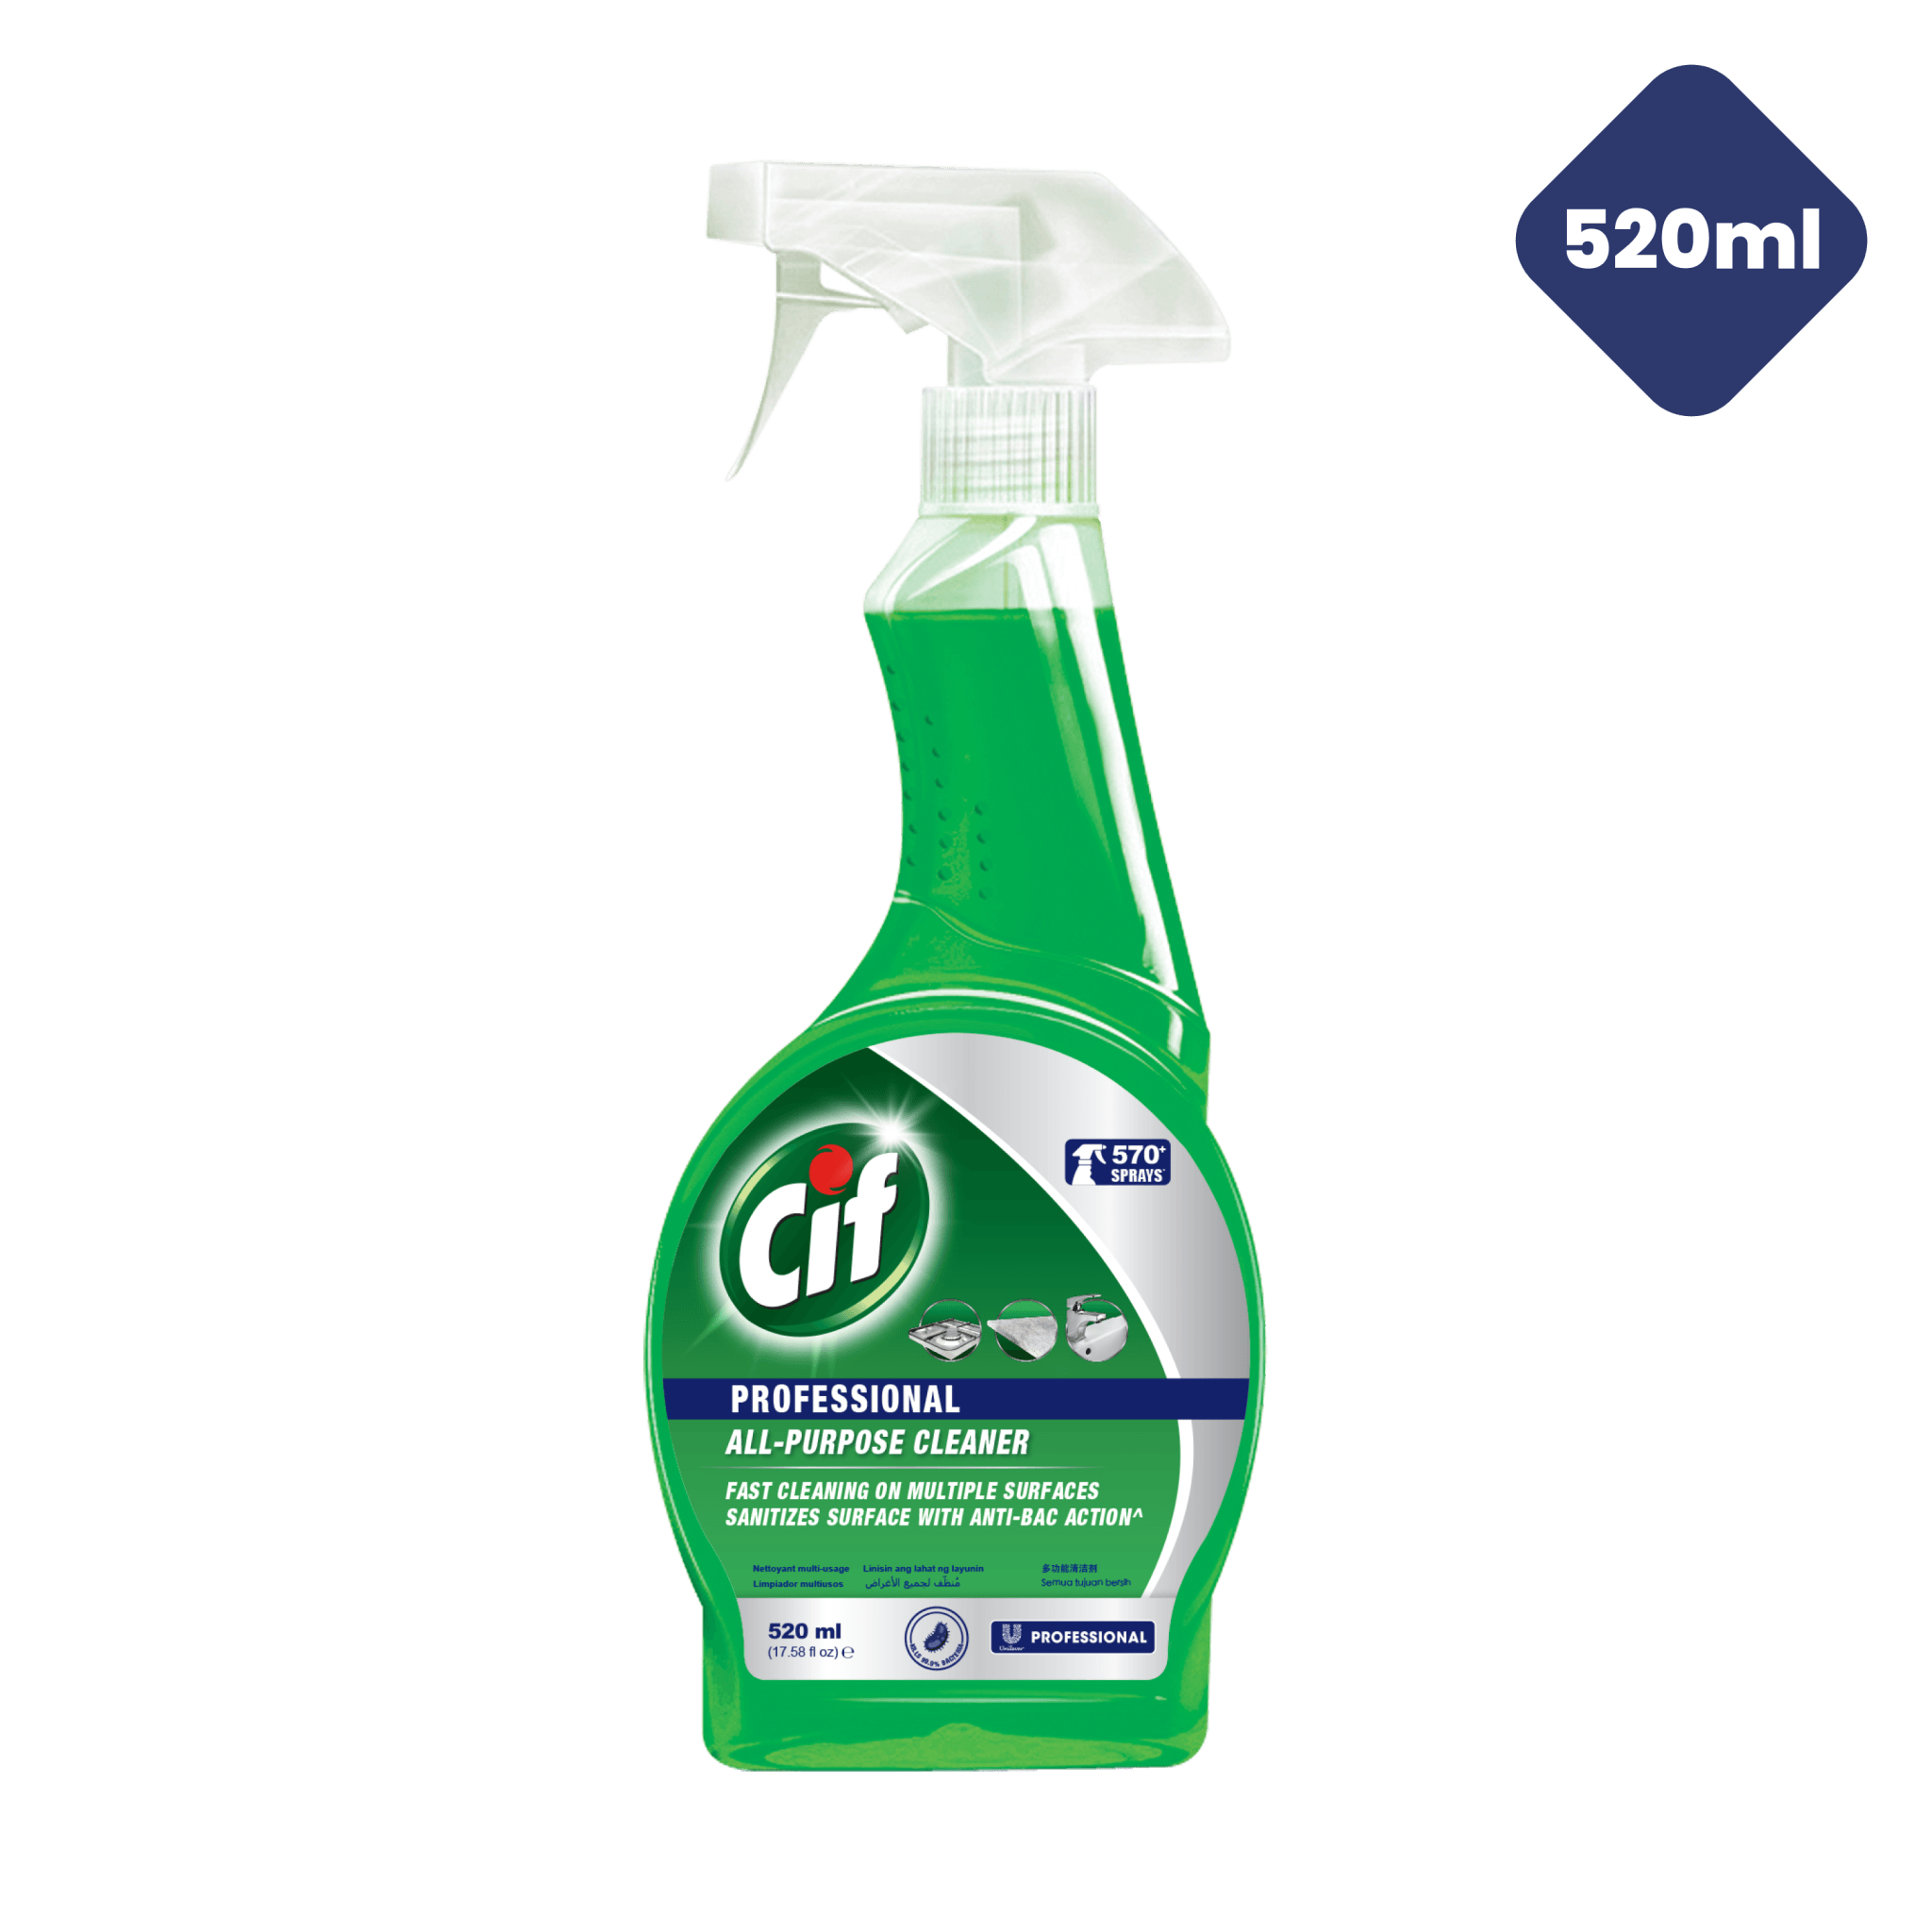 SALE - Buy 1 FREE 1 Cif All Purpose Antibacterial Cleaner 520ml - Unilever Professional Philippines